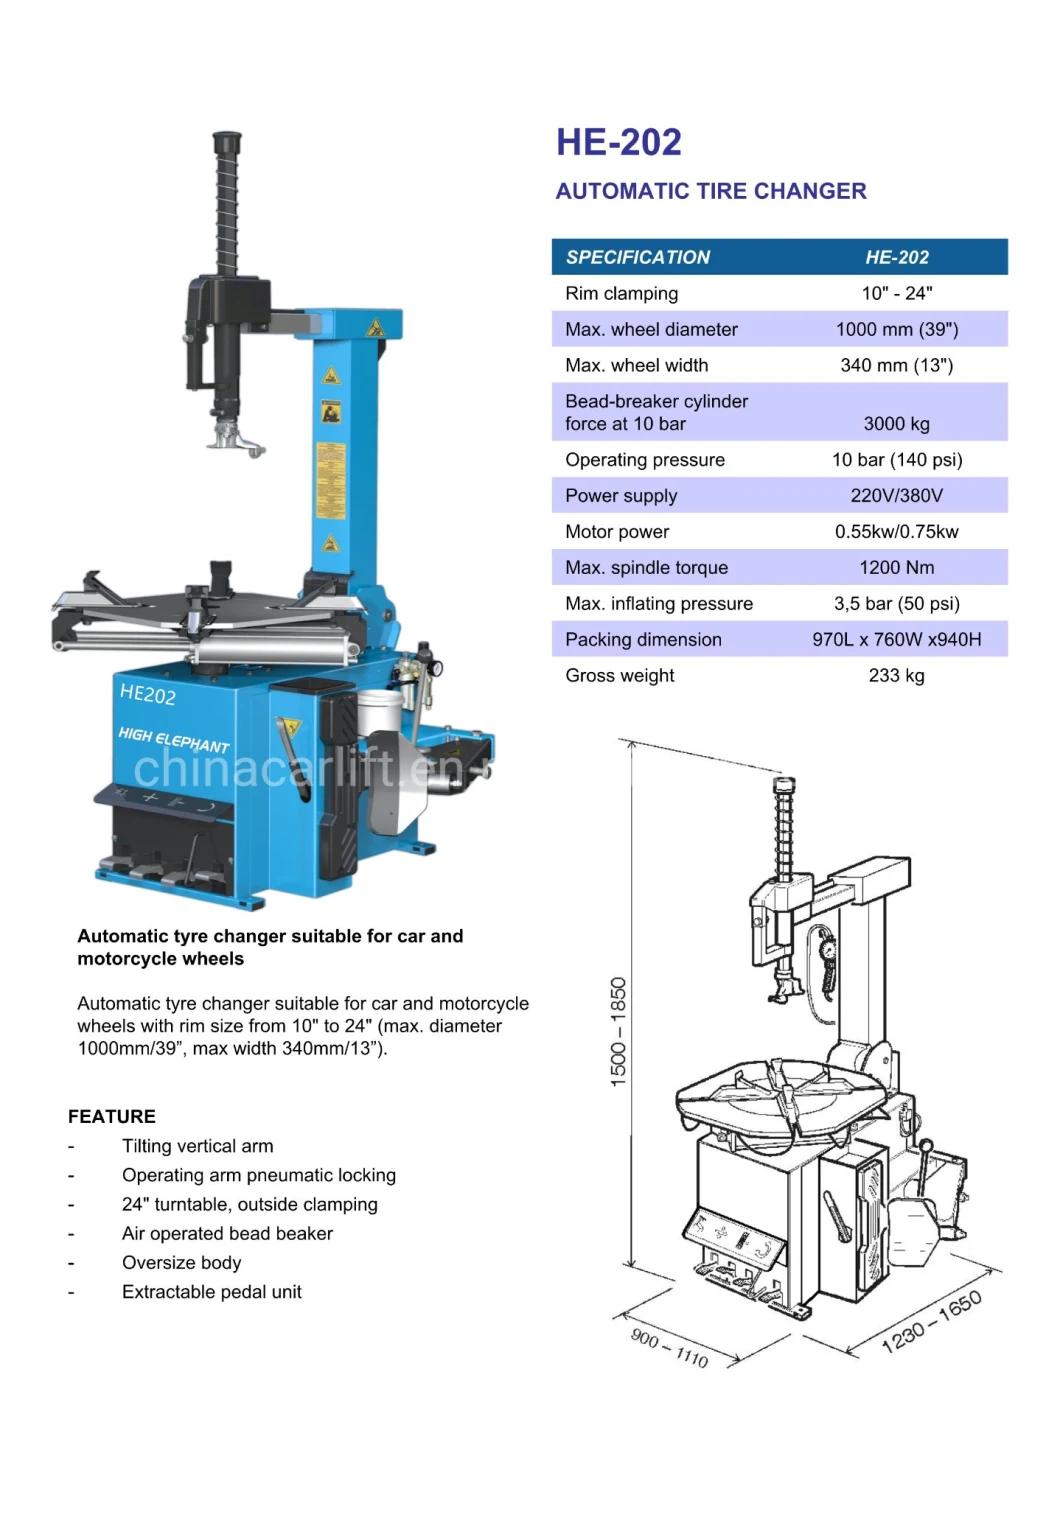 Tire Changers/Automatic Tire Changer/Tire Changer Machine/Tire Changer Balancer Combo/Tire Changer Wheel Balancer